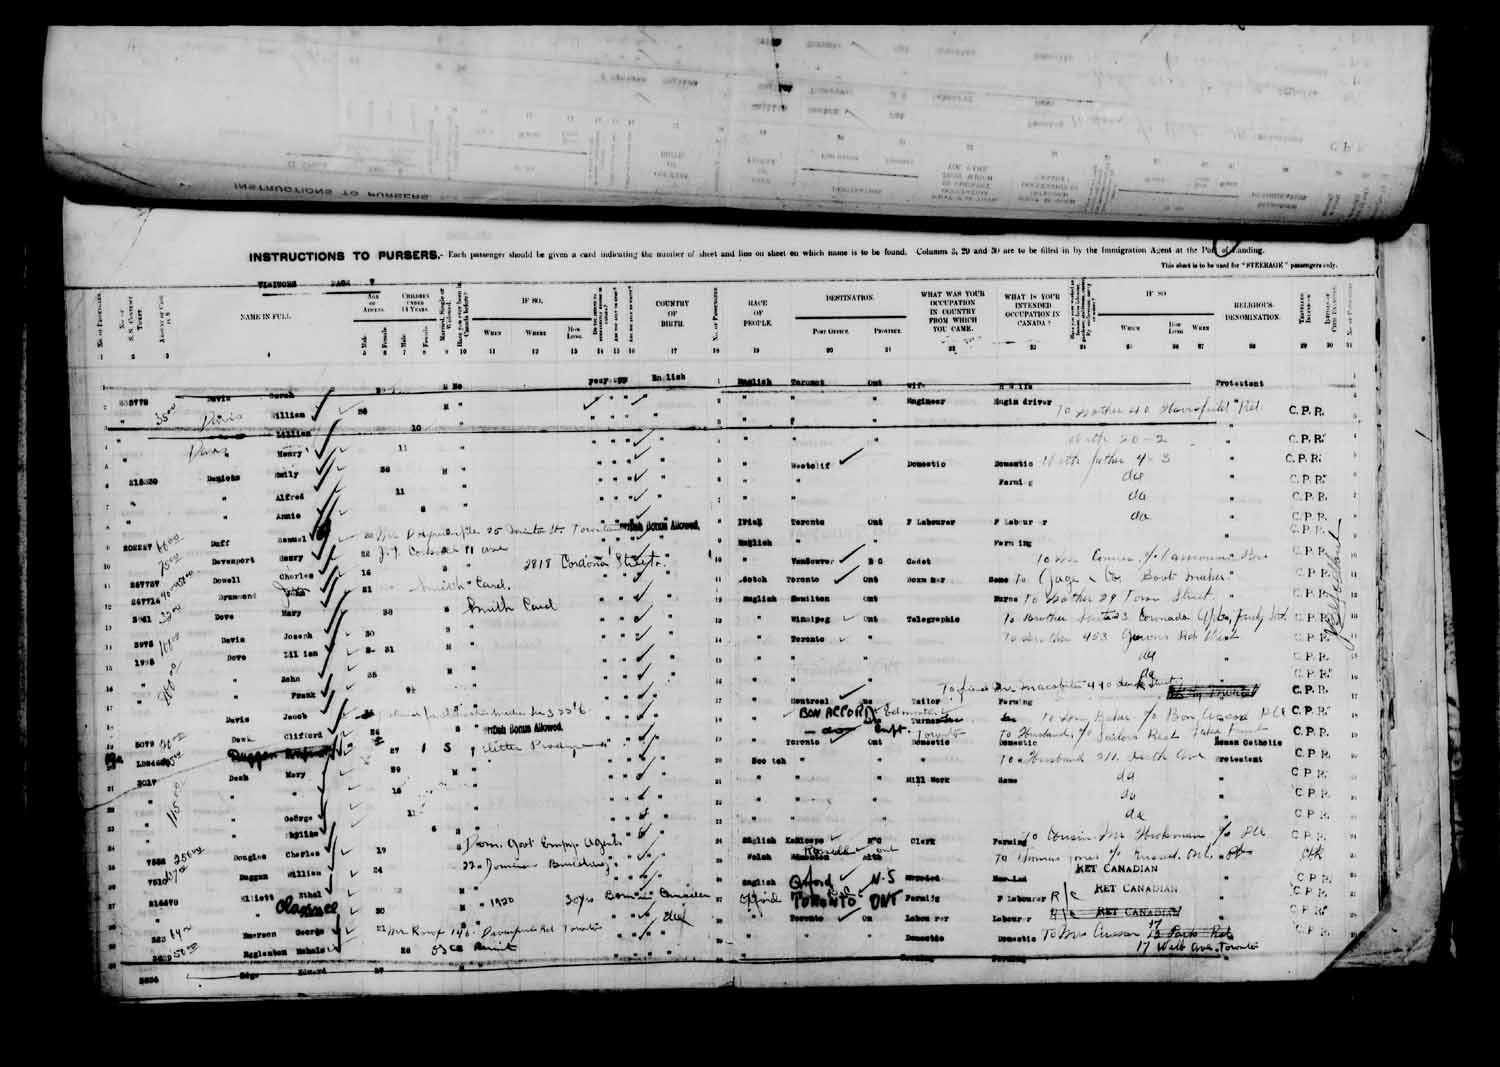 Digitized page of Passenger Lists for Image No.: e003610647